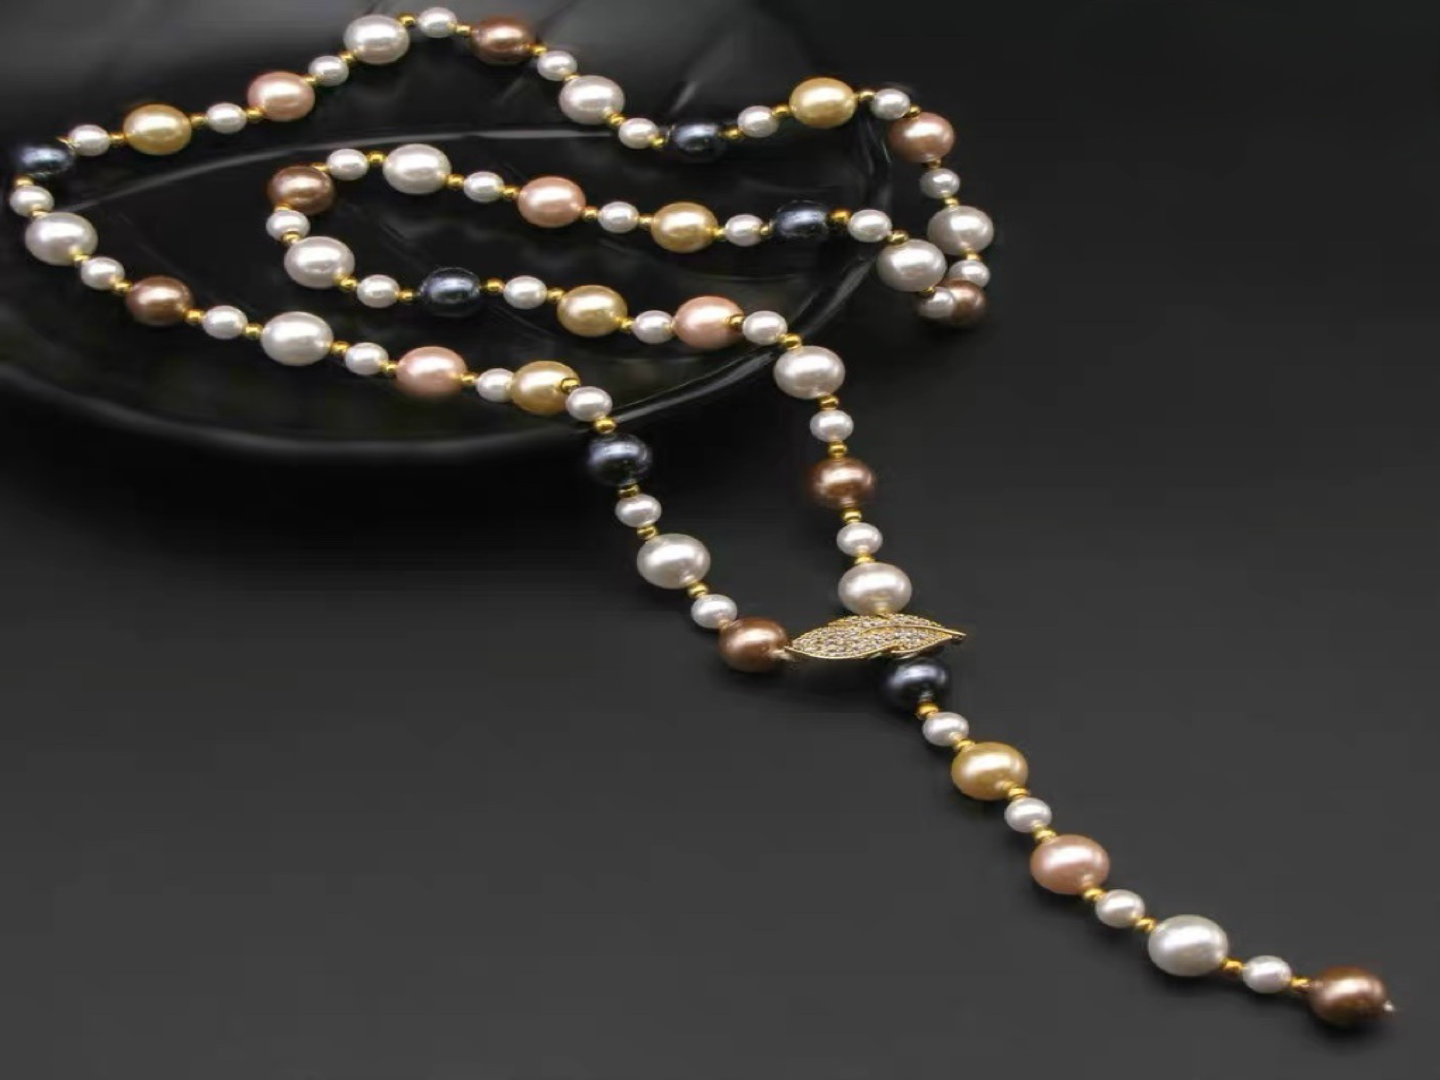 Leaf-shaped metal buckle pearls Handmade Long Necklace Necklace from SHOPQAQ